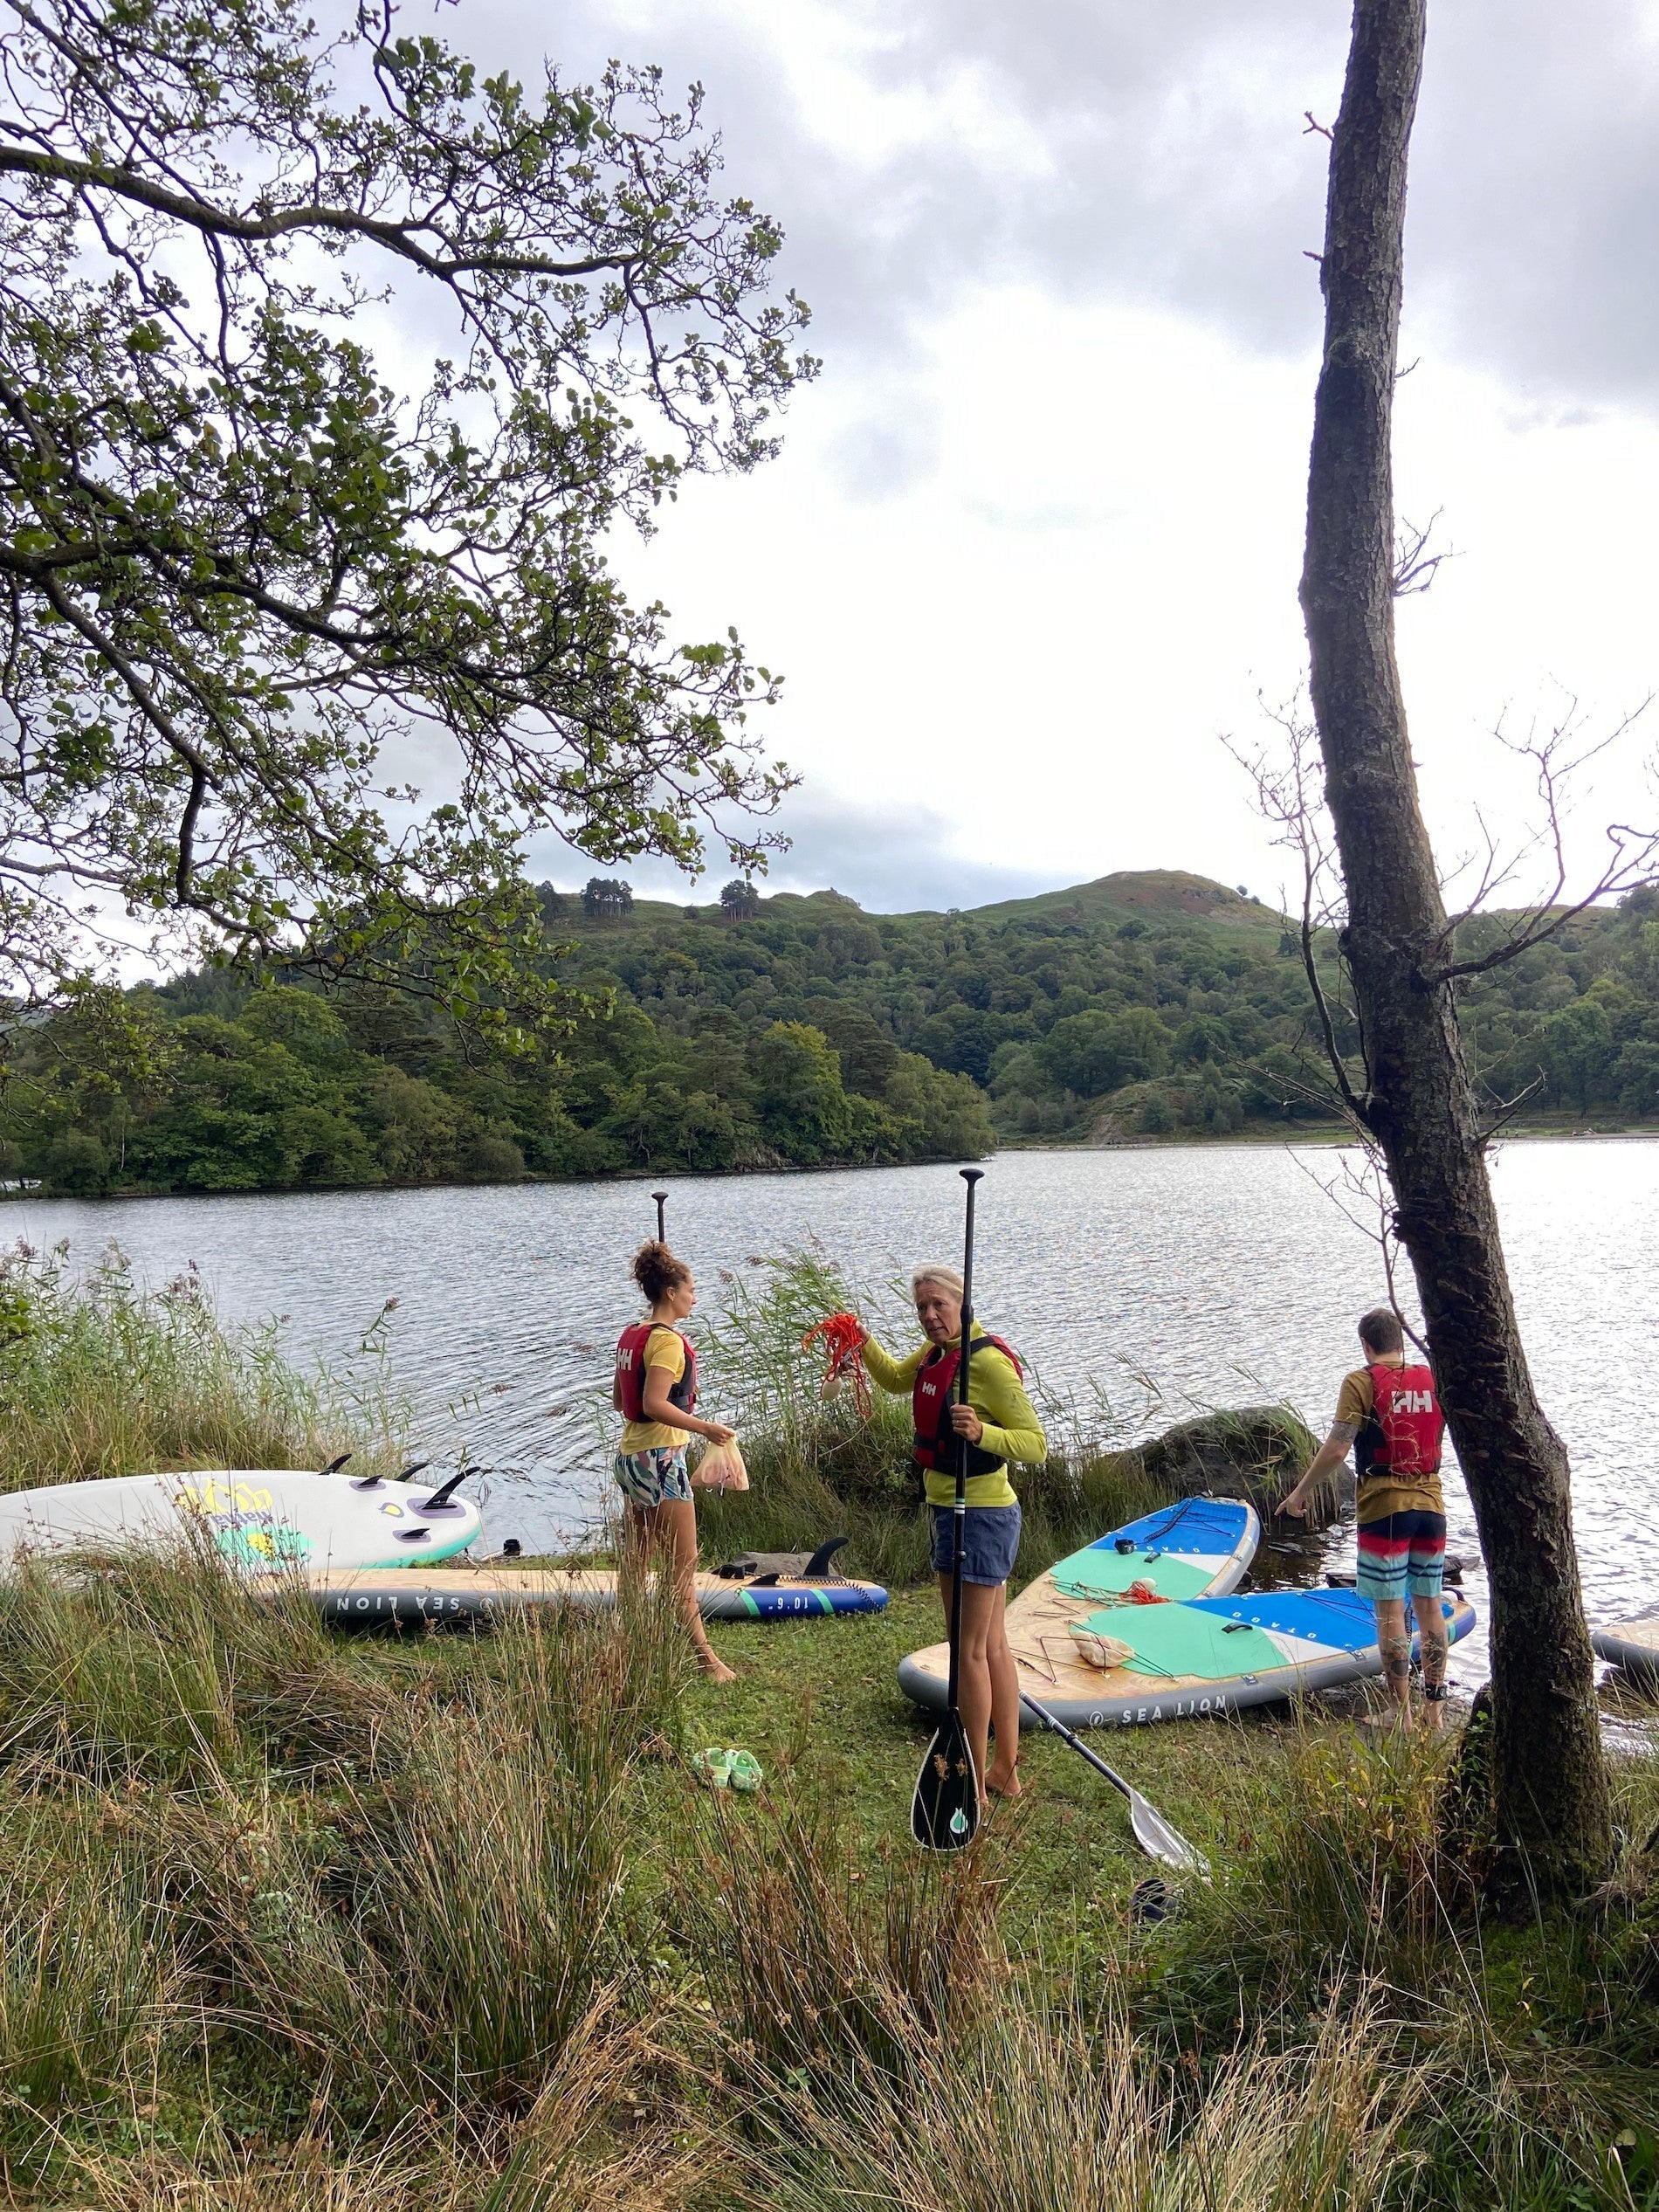 October 3-5th Yoga Retreat in the Lake District: yoga, paddle boarding, lakes & mountains